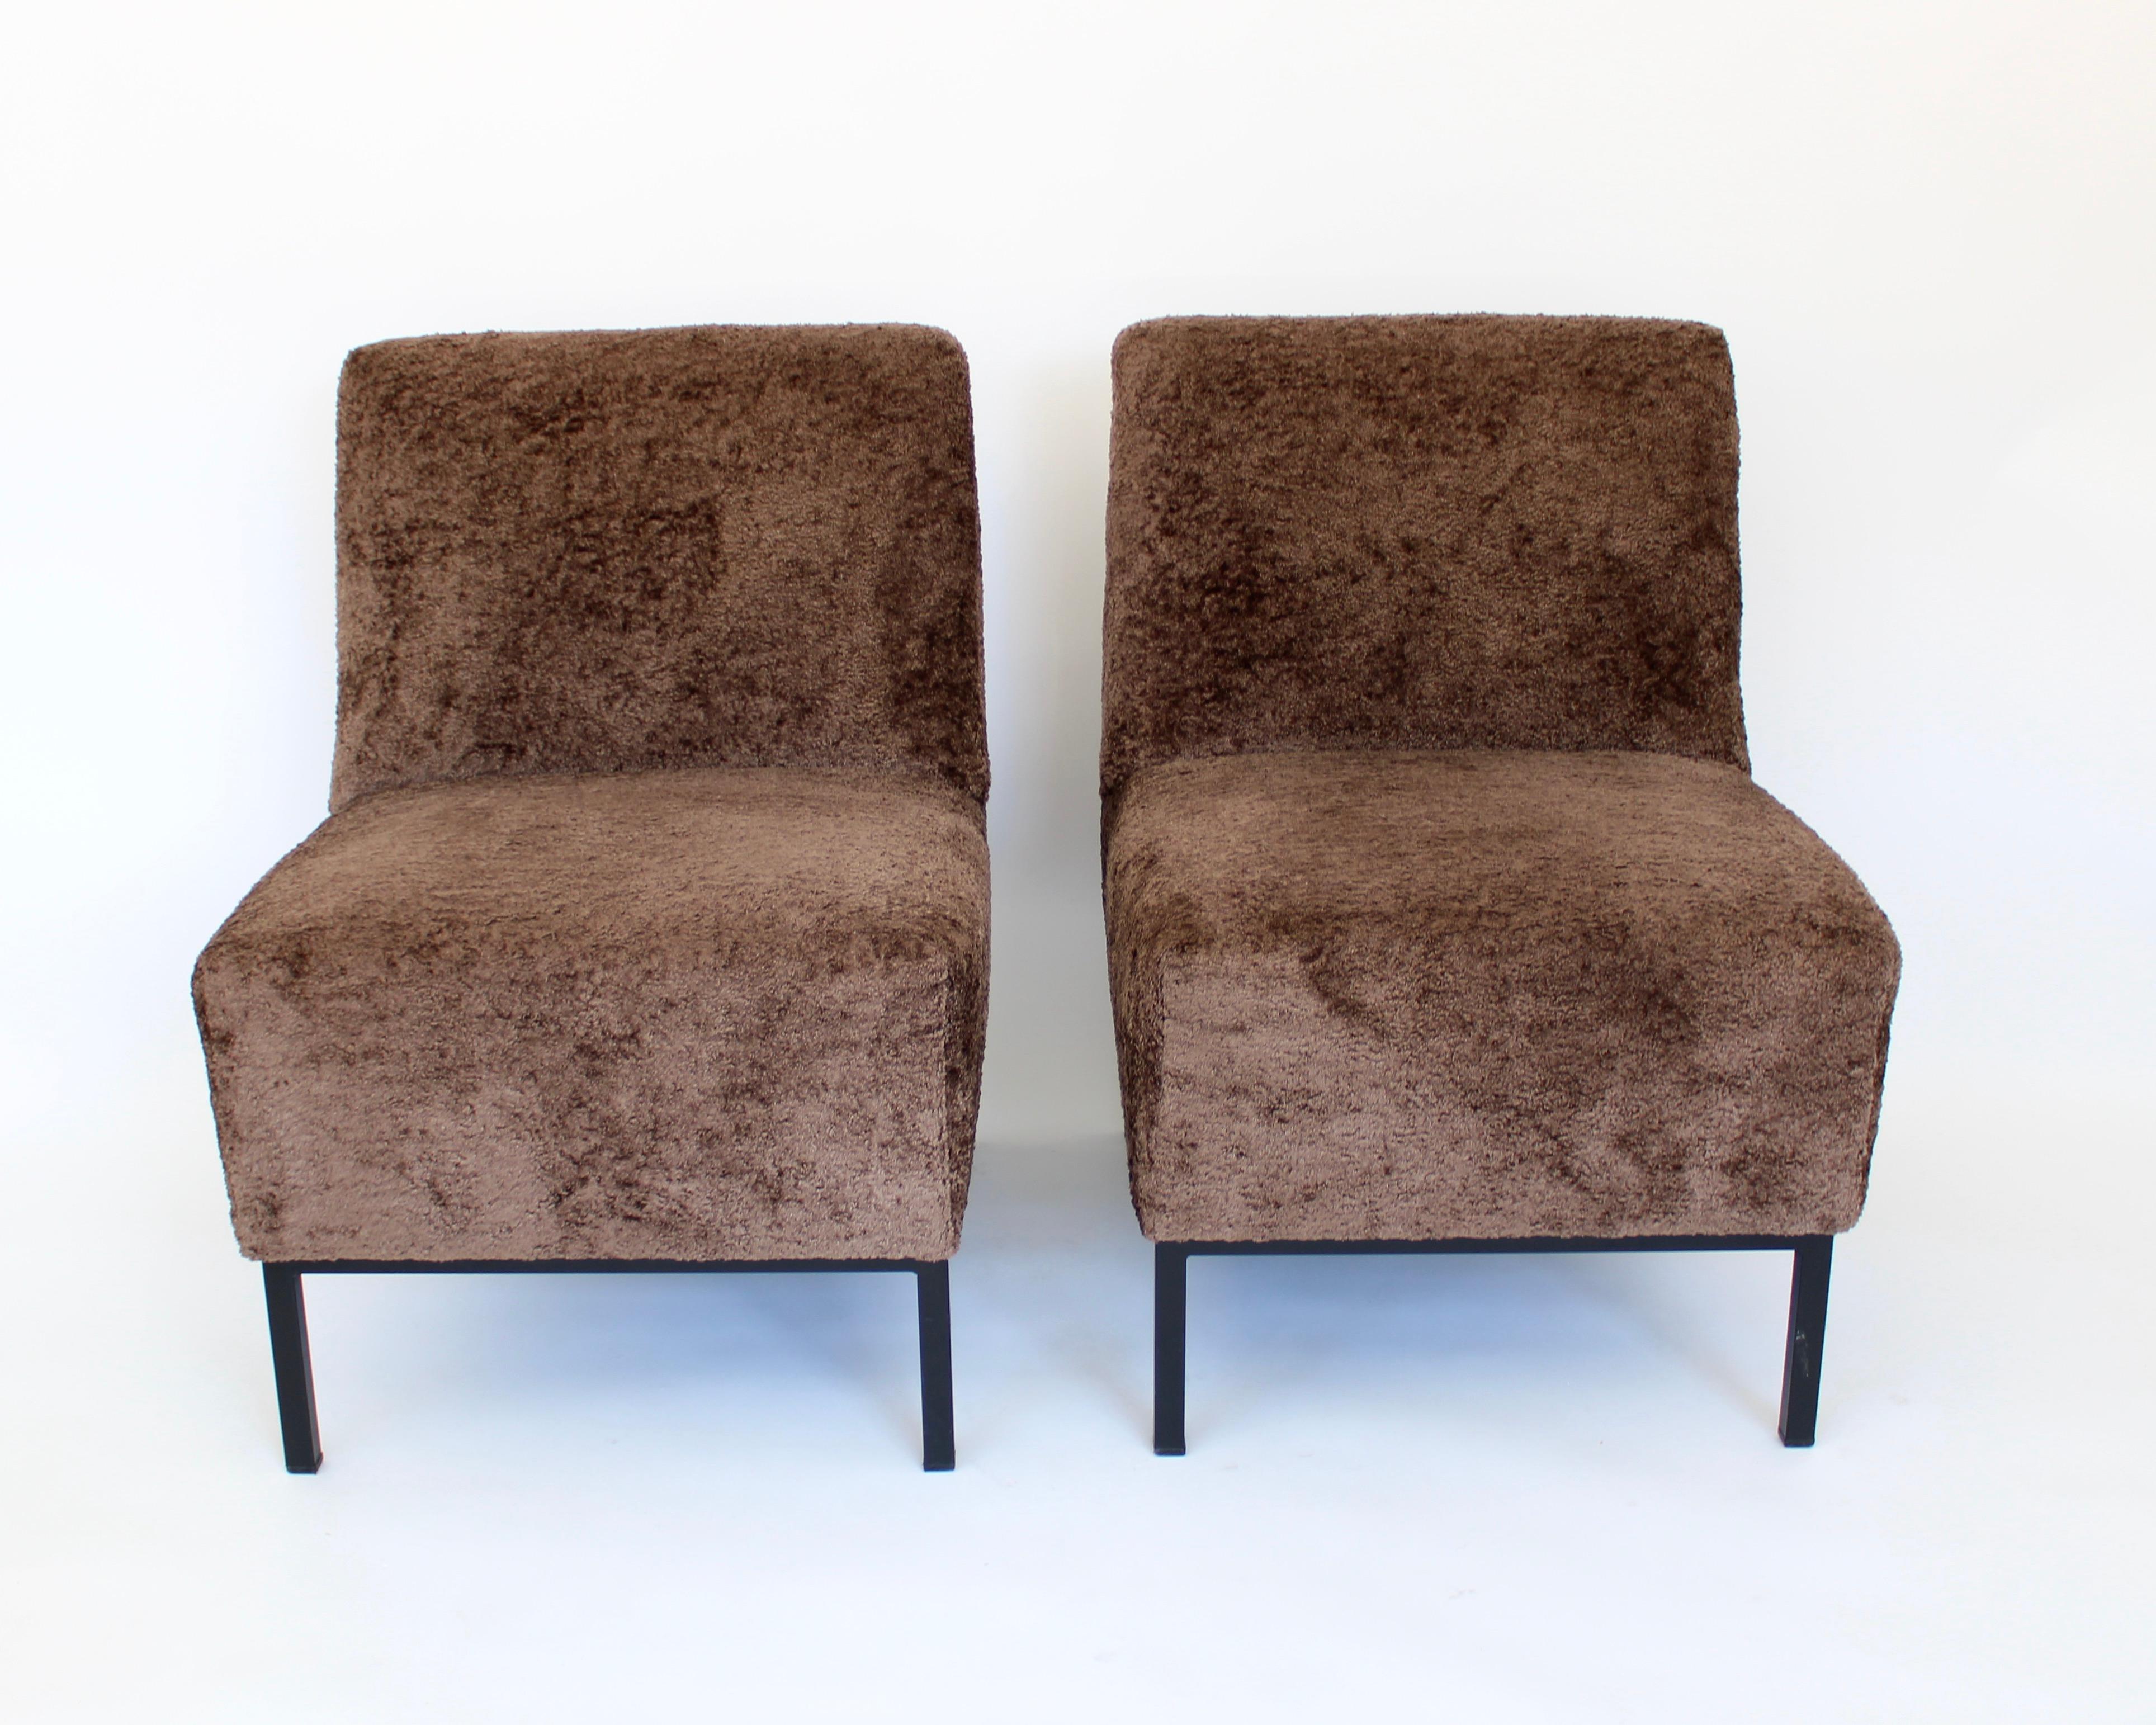 Pair of French upholstered lounge chairs by designer Alain Richard, France c 1960. 
Oversized cushions upholstered in a warm brown textured velvet but not chenille. 
This upholstery is from the 1980's. 
Modernist and rationalist design typical of